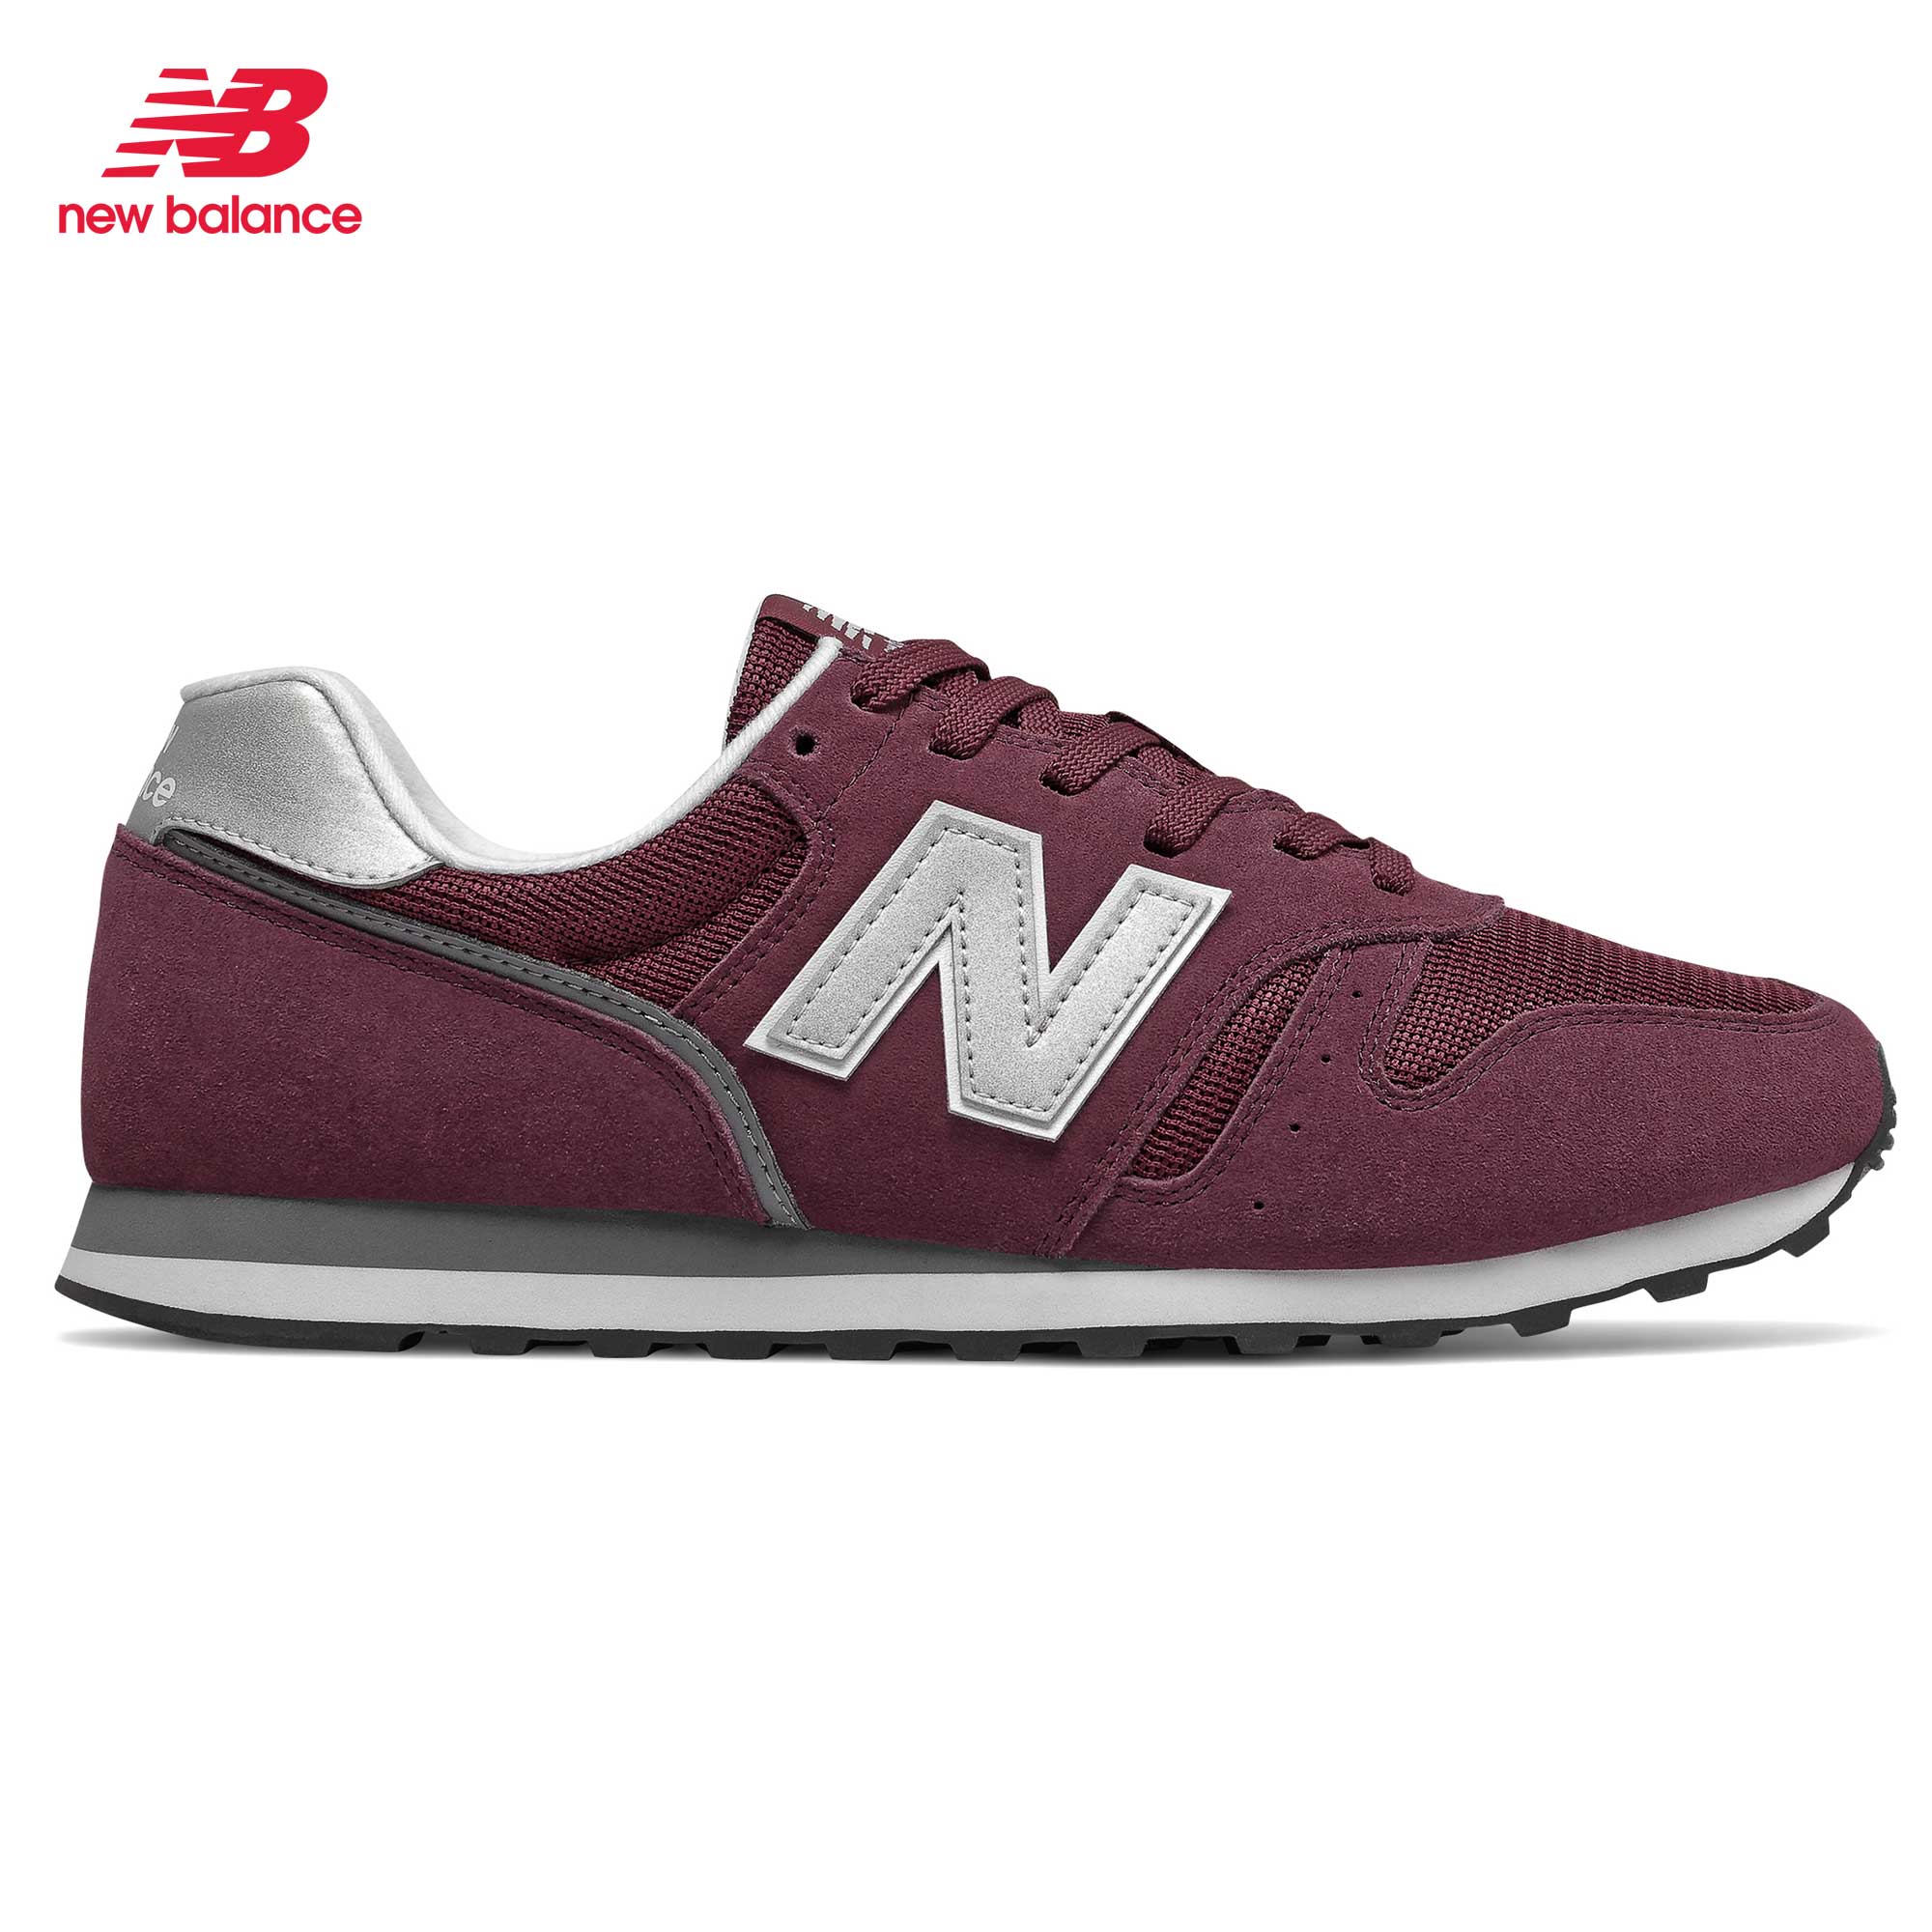 mens red new balance shoes